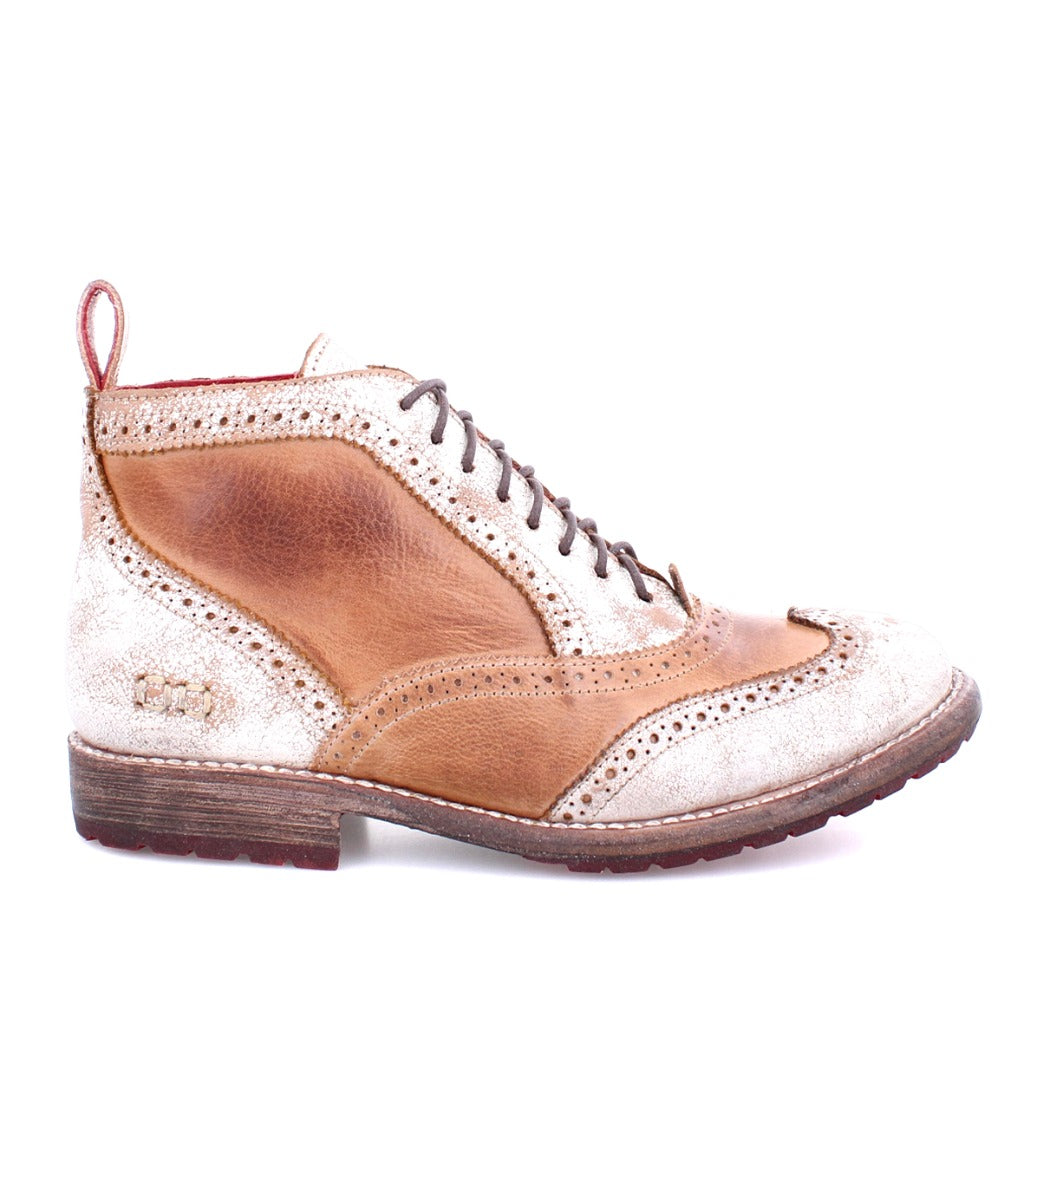 A women's Bed Stu Sally wingtip lace up boot.